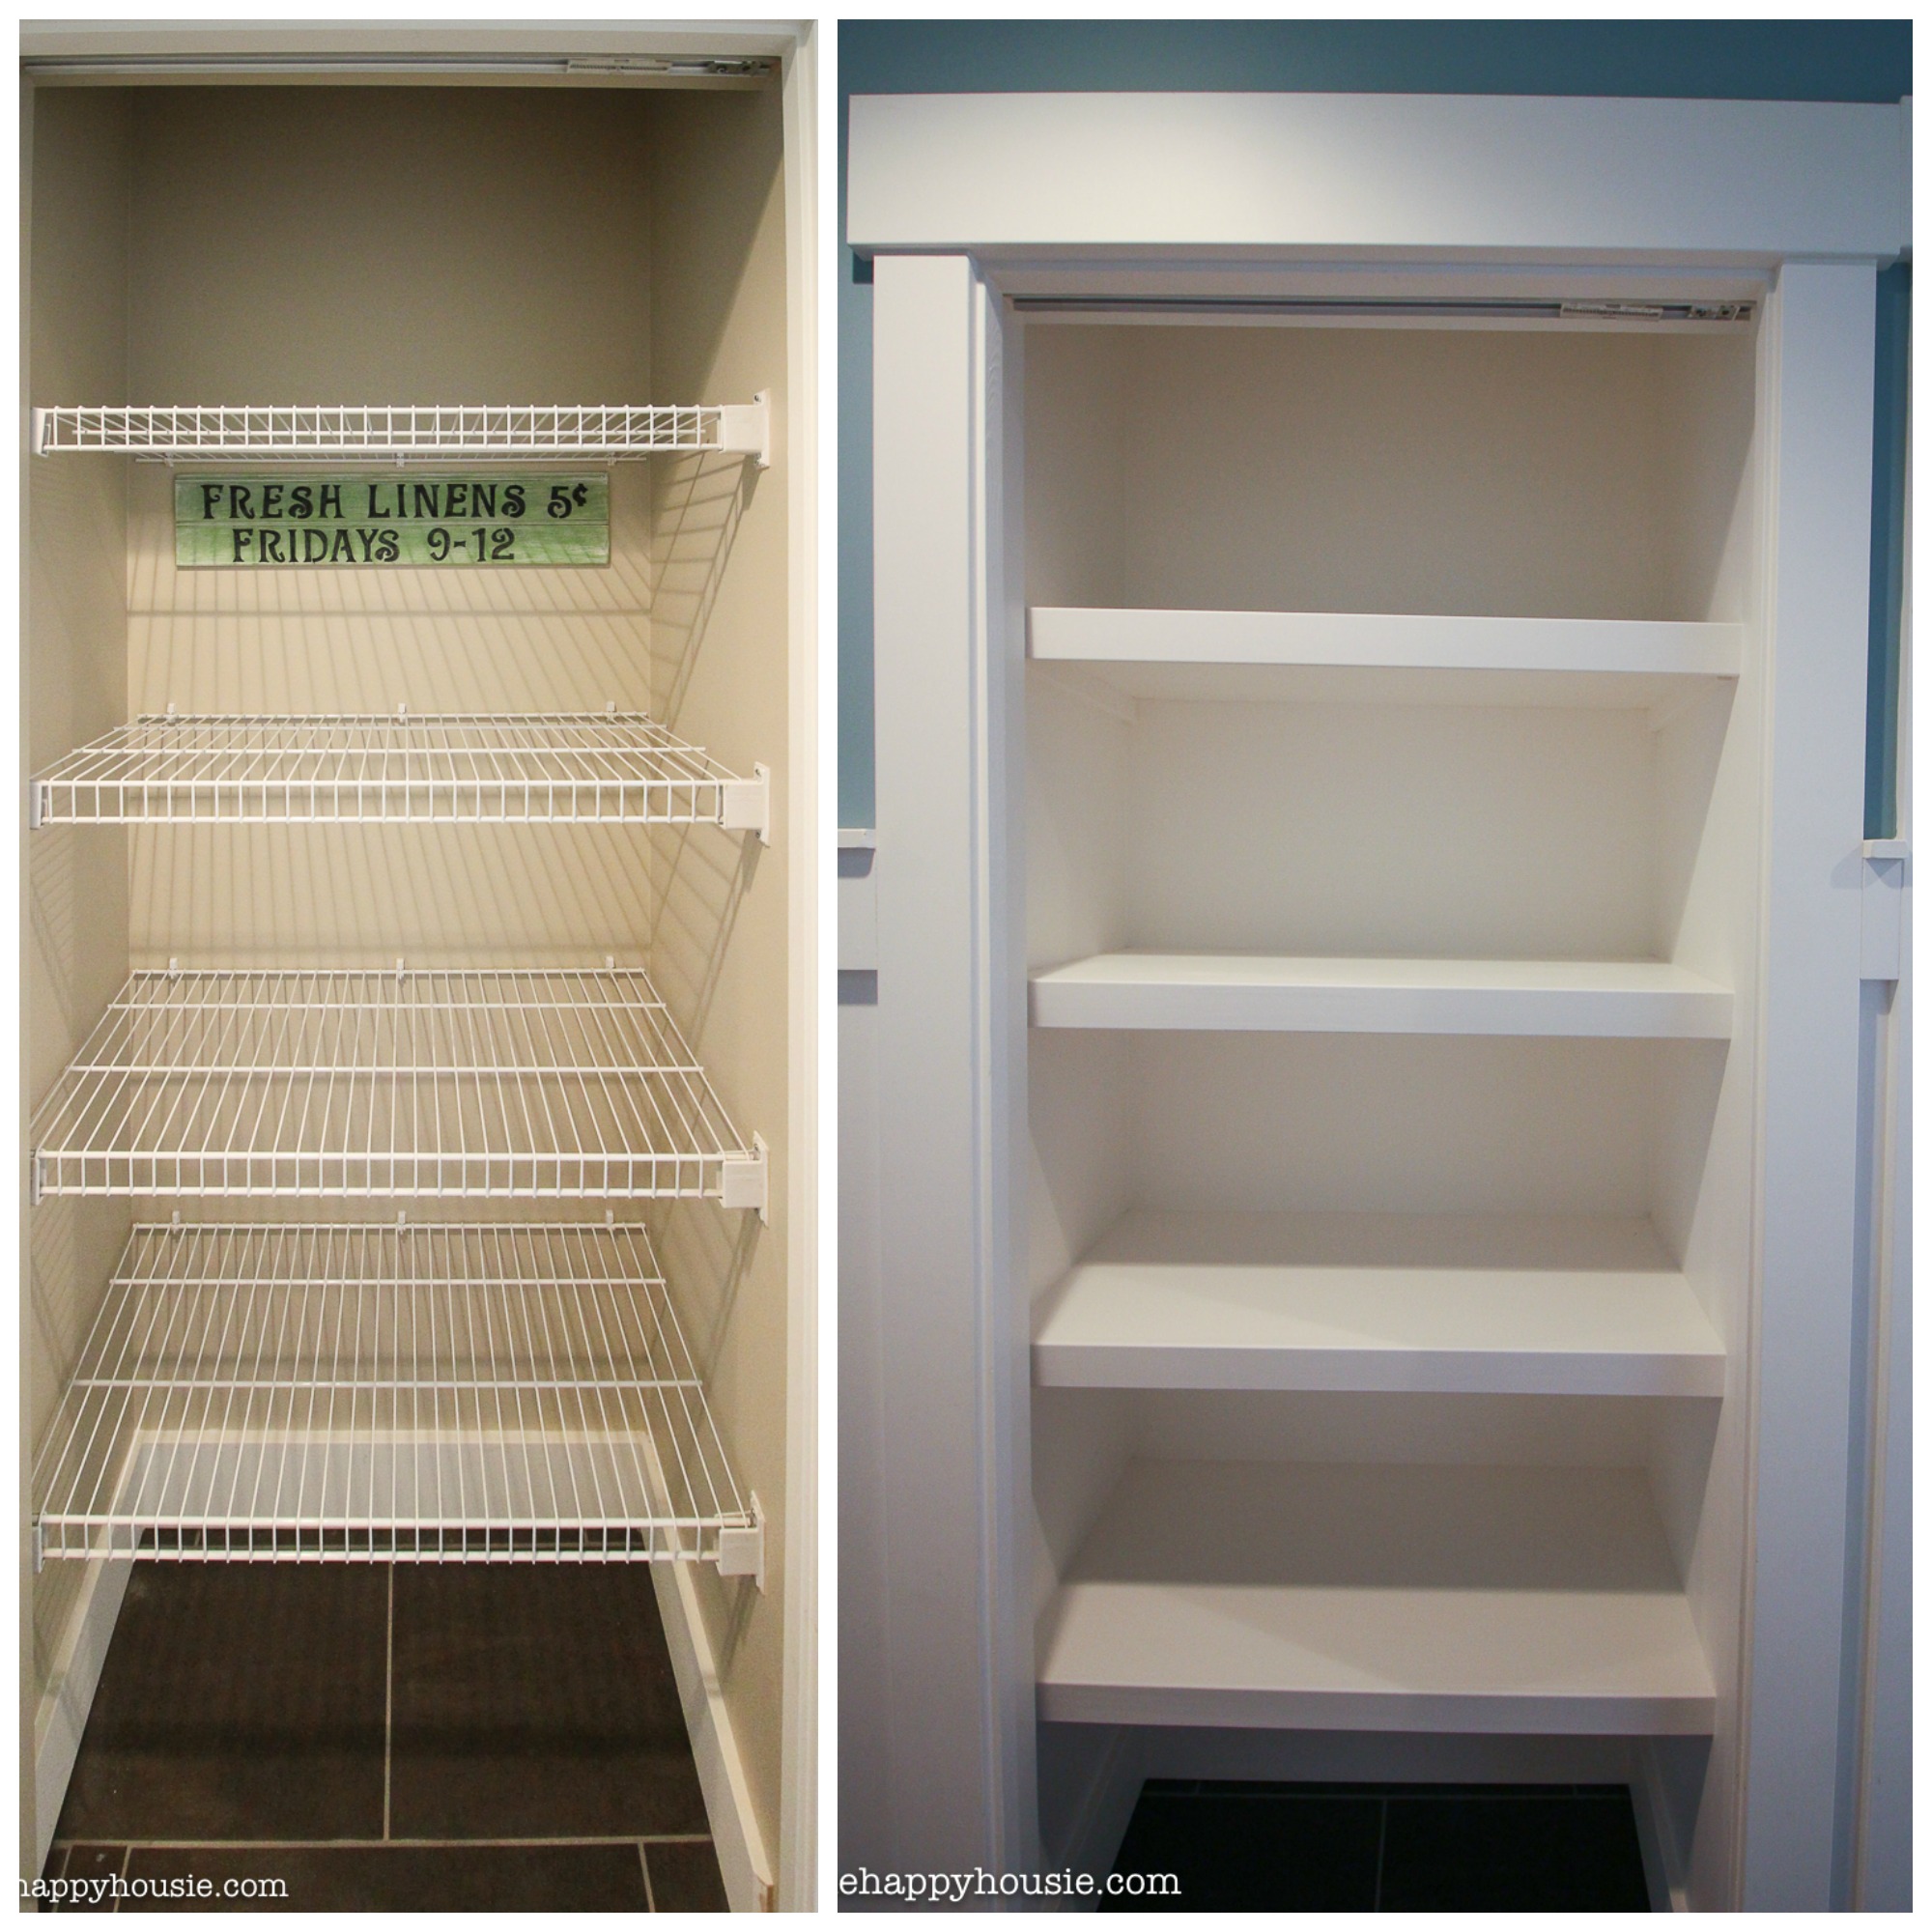 https://www.thehappyhousie.com/wp-content/uploads/2017/02/How-we-gave-our-closet-a-beautiful-custom-feel-by-replacing-builder-basic-wire-shelves-with-wooden-shelves-.jpg